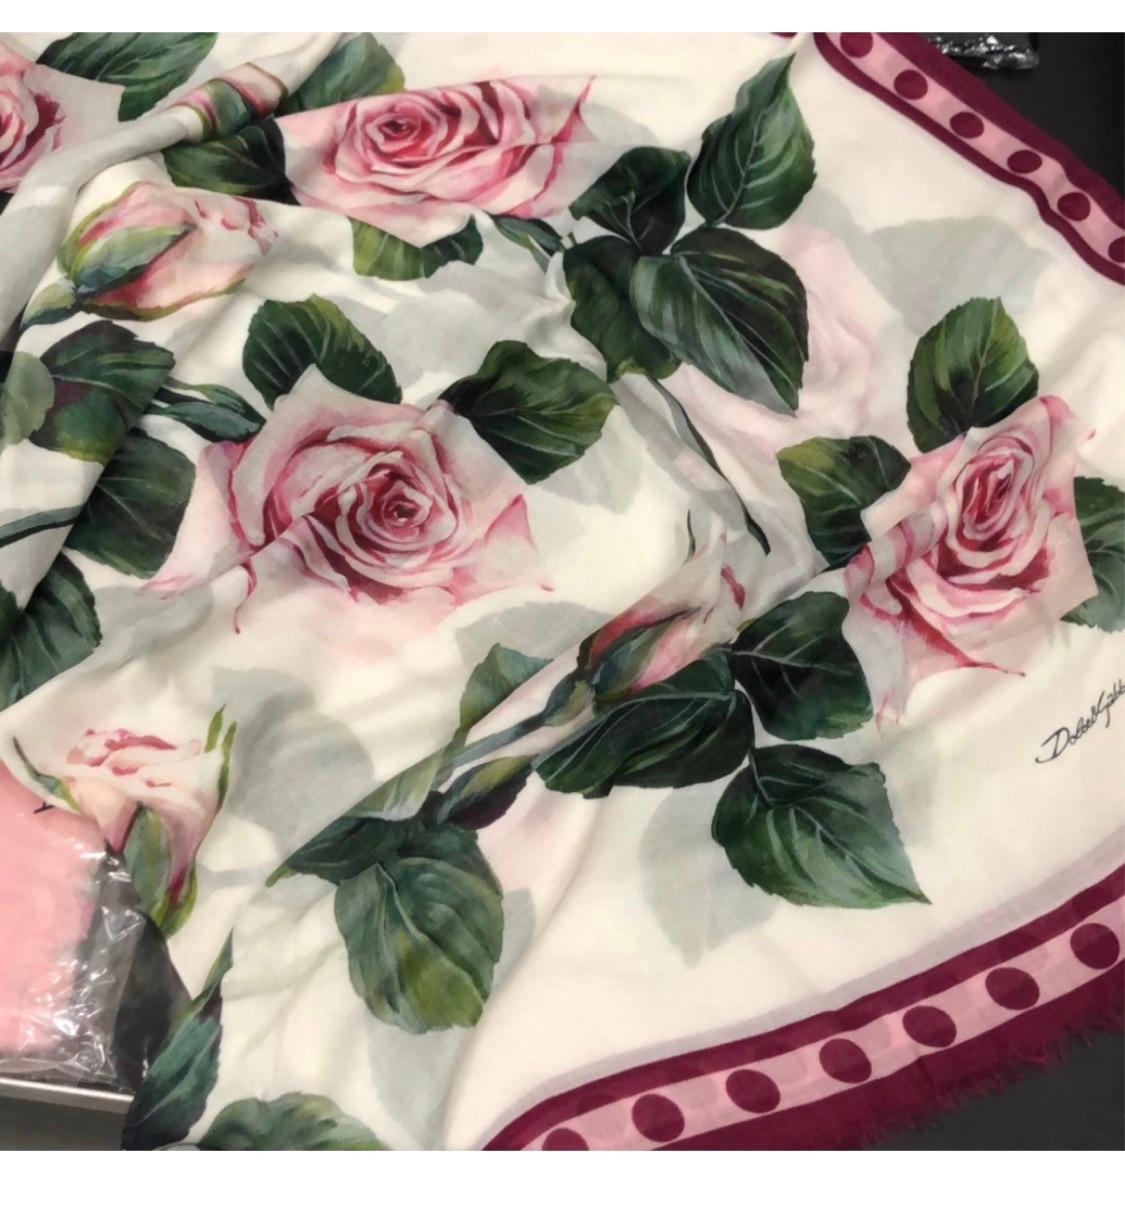 Gray Dolce & Gabbana White Tropical
Rose printed cashmere modal blended scarf wrap